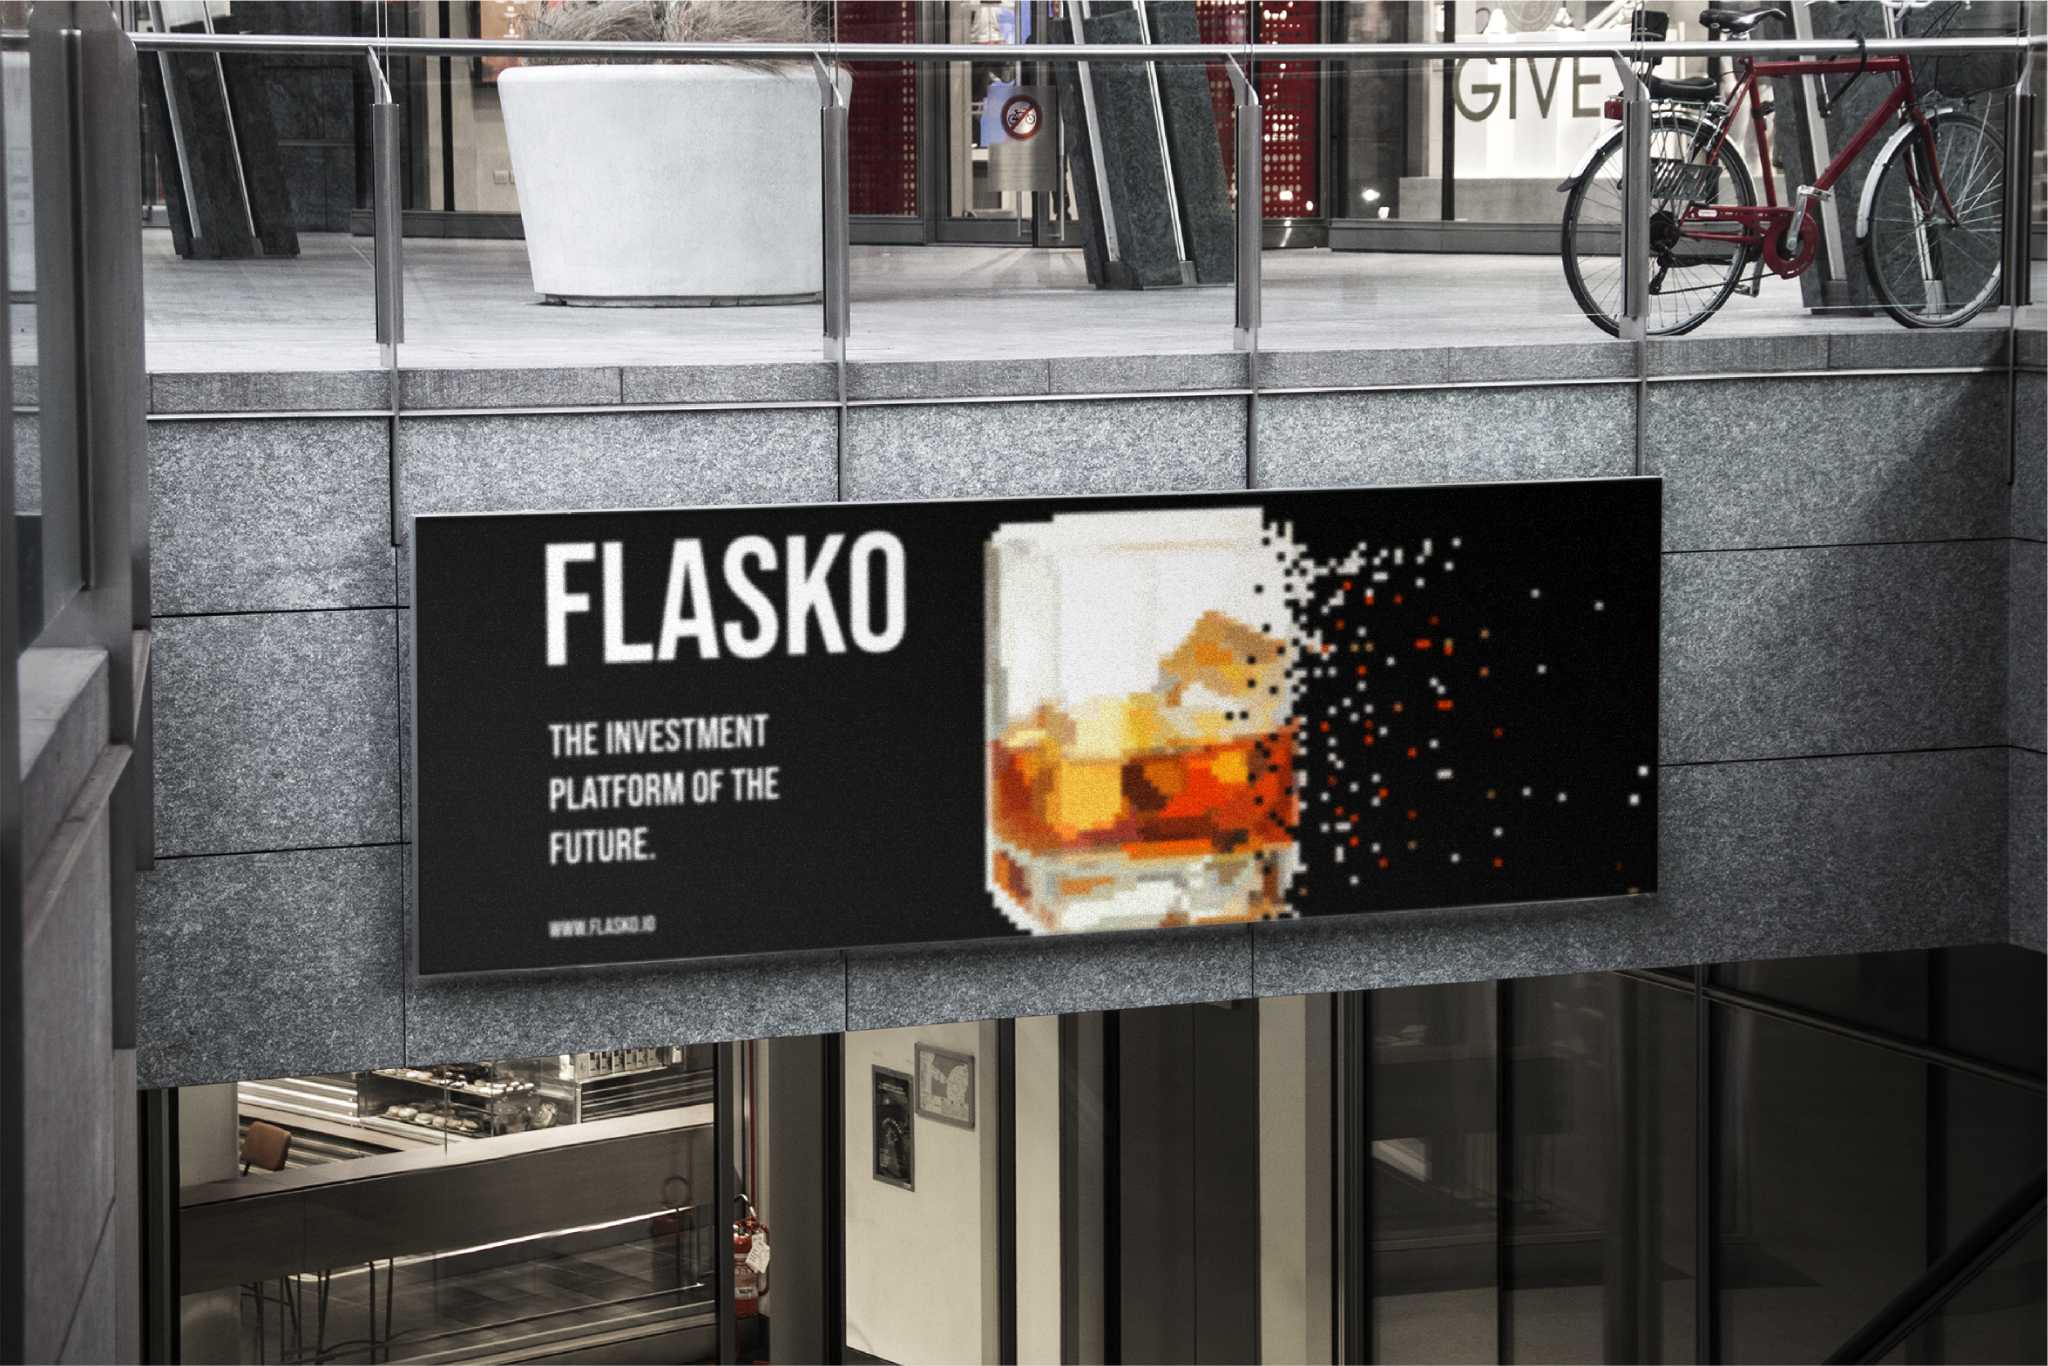 Flasko (FLSK) Presale Has Garnered The Attention Of Monero (XMR) And Aave (AAVE) Investors